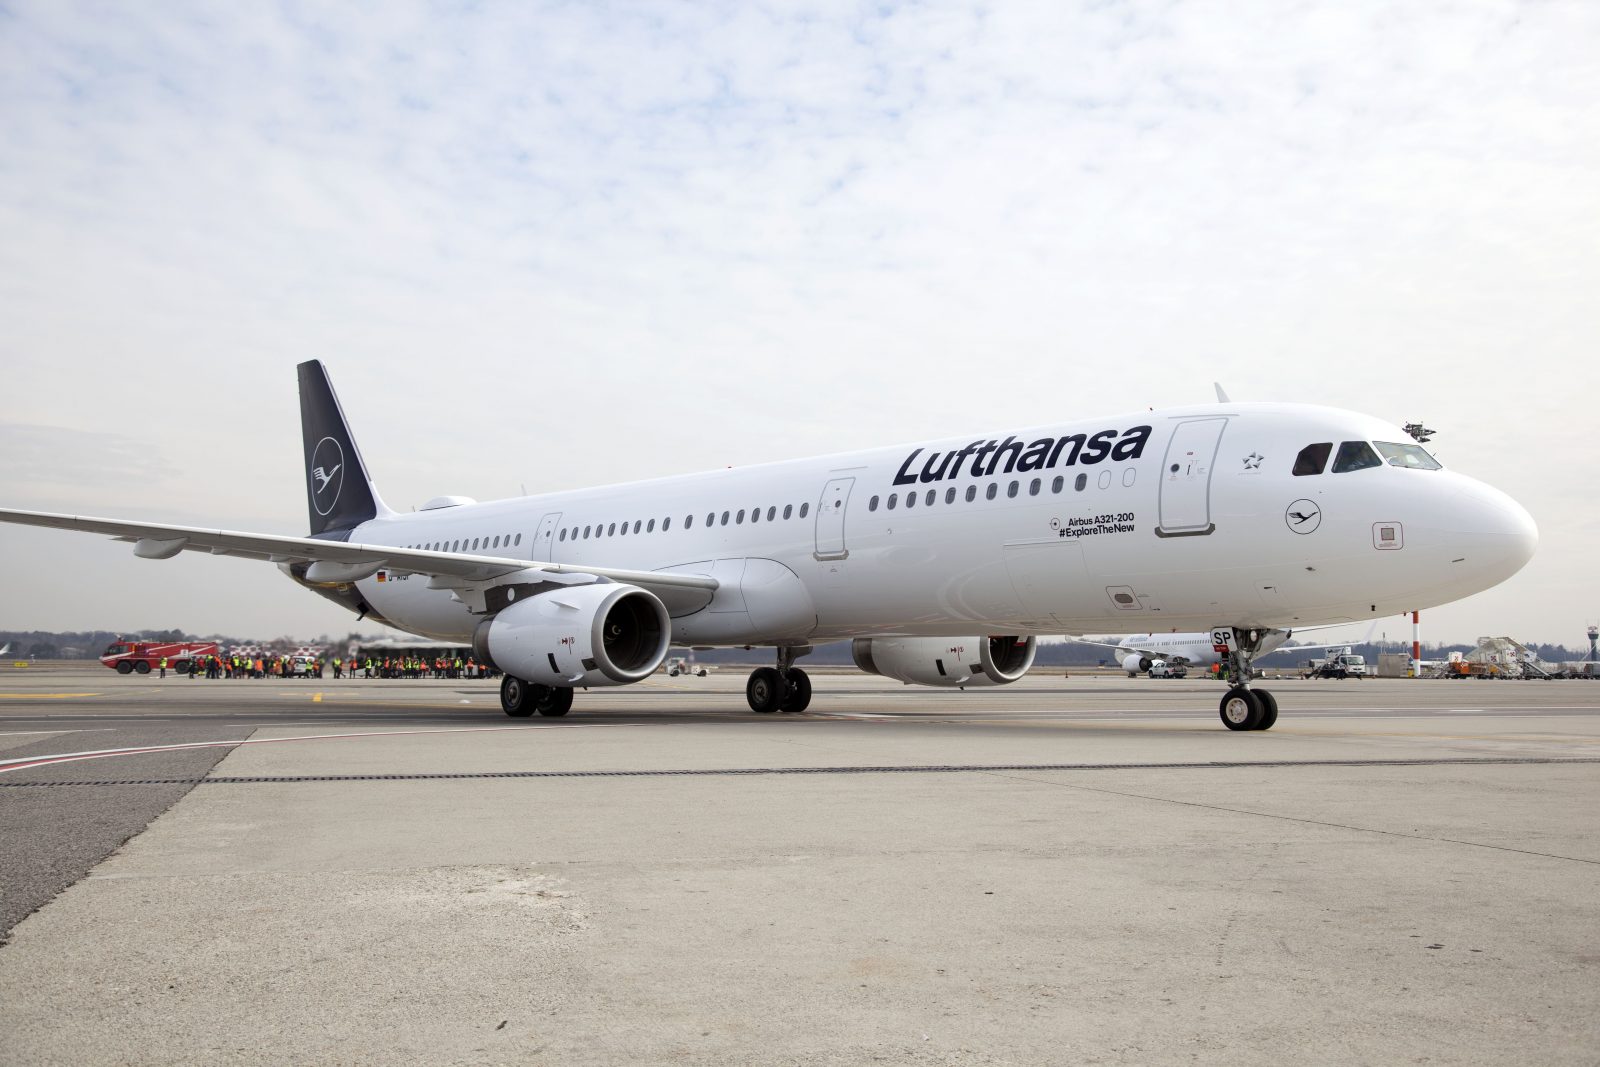 Lufthansa A321 Diverts TWICE When Both Air Conditioning Systems Failed